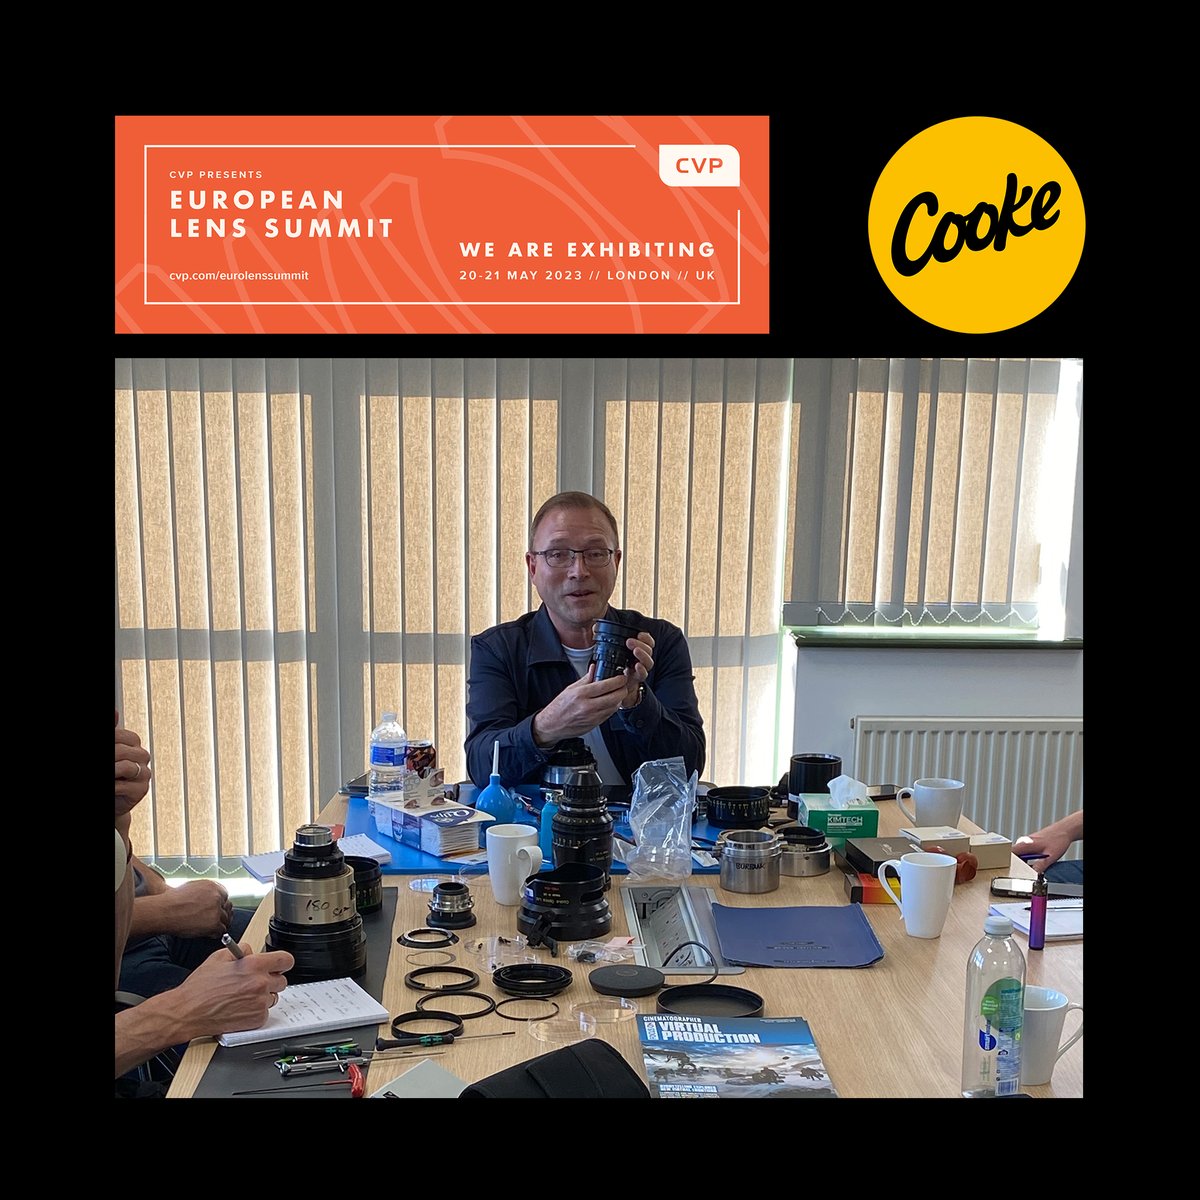 Cooke and CVP will host a masterclass at the European Lens Summit this weekend. They will demonstrate full disassembly, reassembly, and testing of Cooke S4/i lenses to bring them back to factory specifications. register here: bit.ly/3O3cDKk